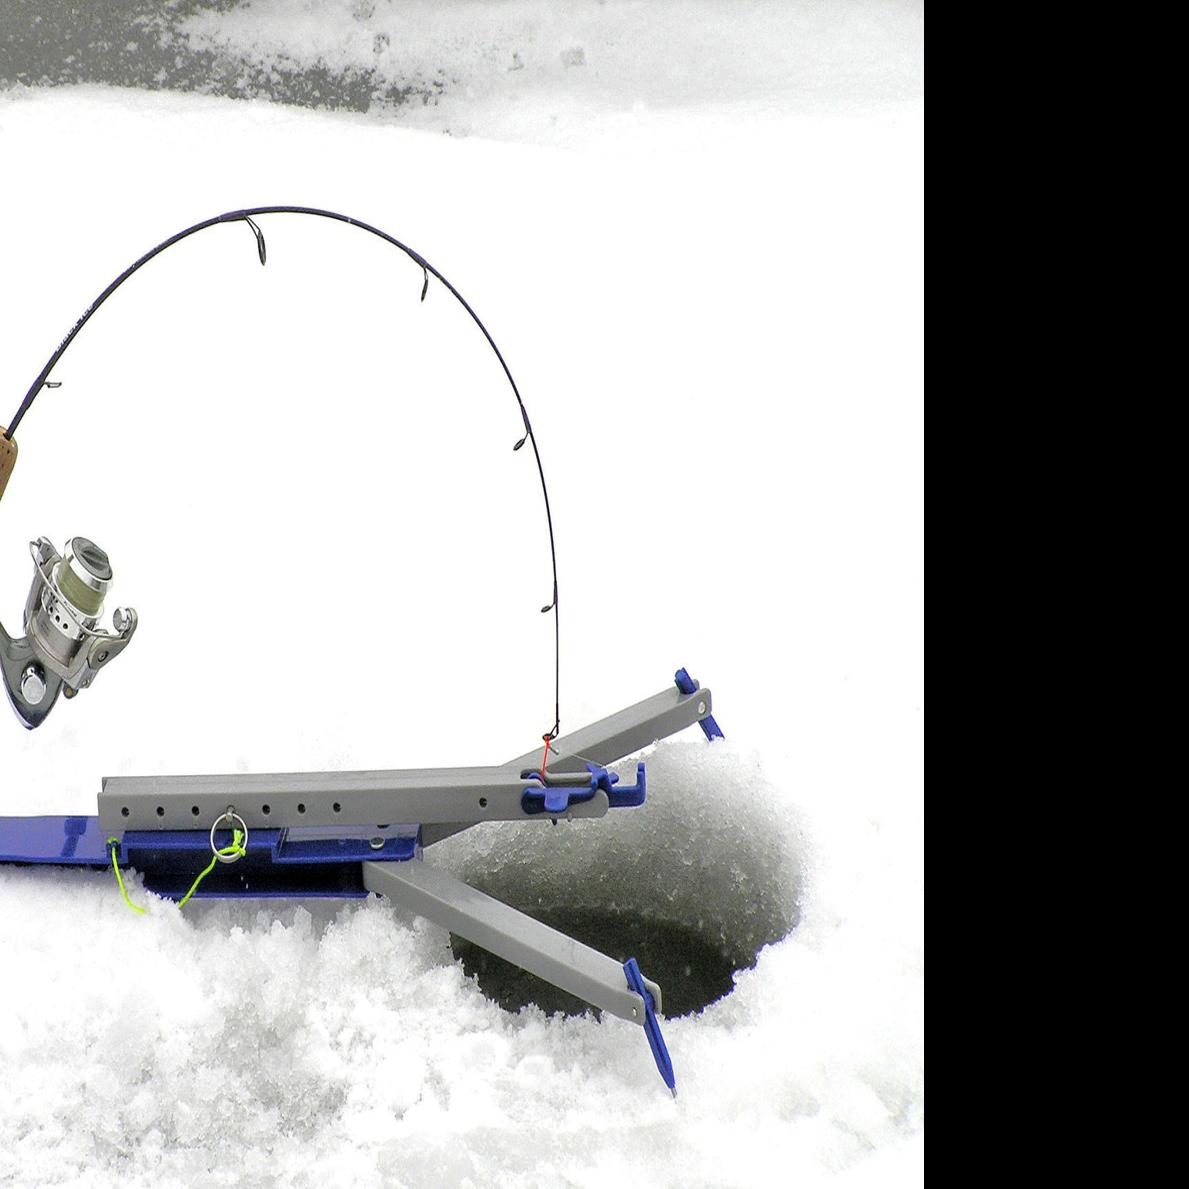 Hooking into success: Rigby nurse manufactures popular ice fishing